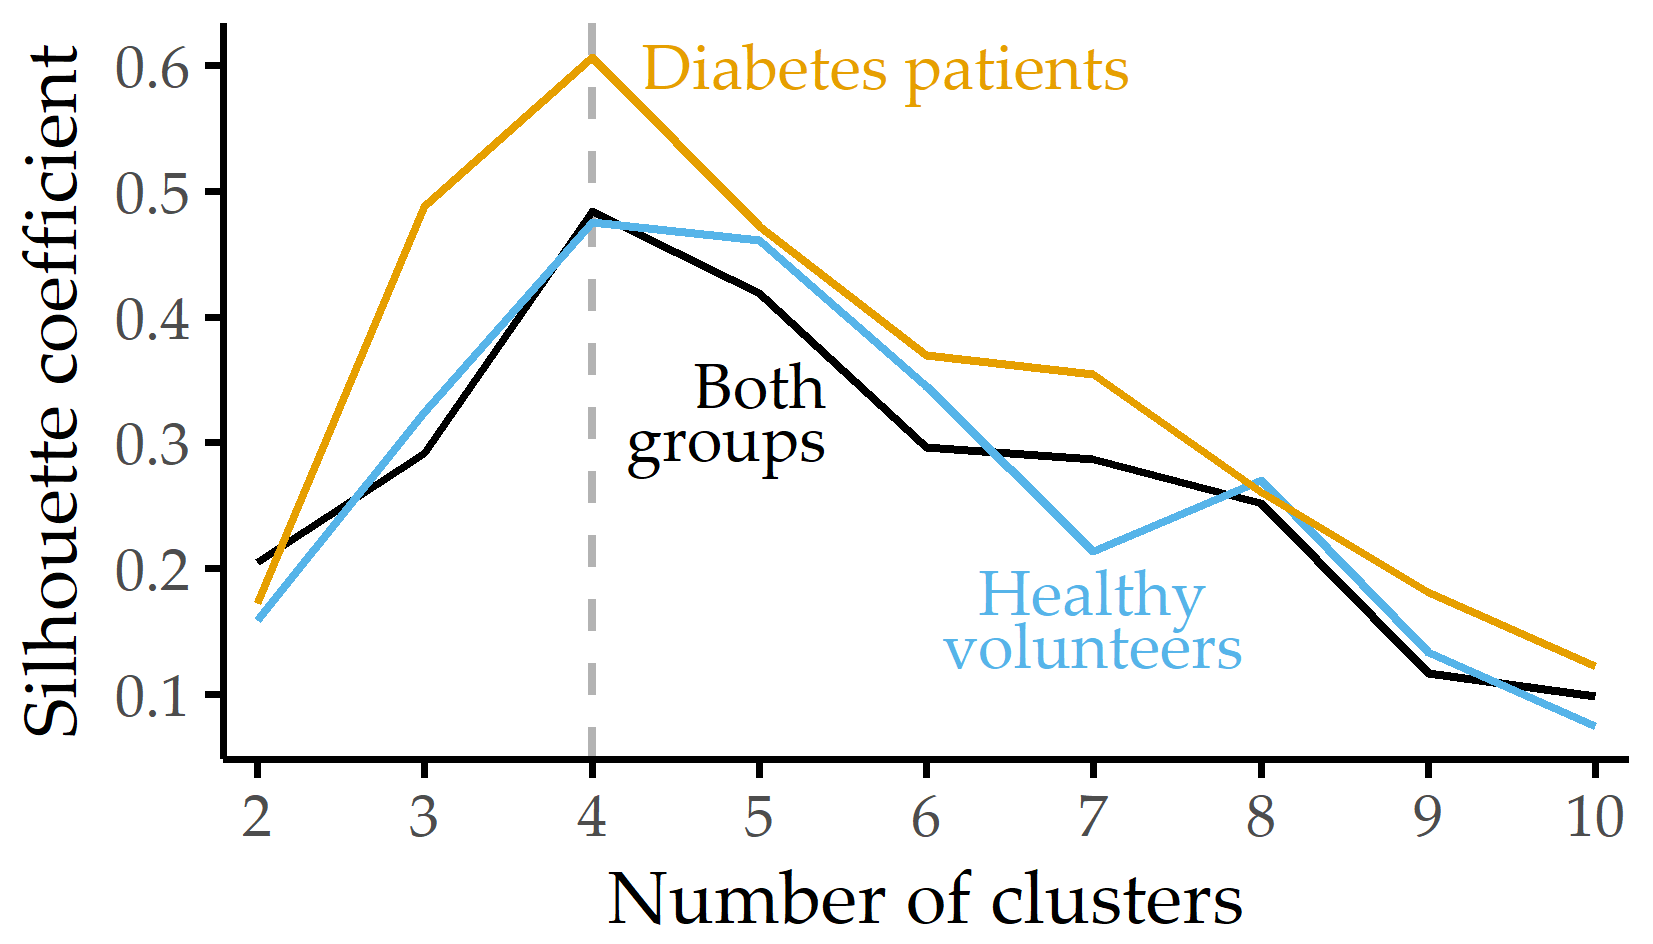 Silhouette coefficient for different numbers of clusters. Silhouette coefficient for each group and k-medoids clustering using the distribution of eight plantar pressure regions with the number of clusters k set between 2 and 10. For each group, the best clustering is obtained with k = 4 clusters.